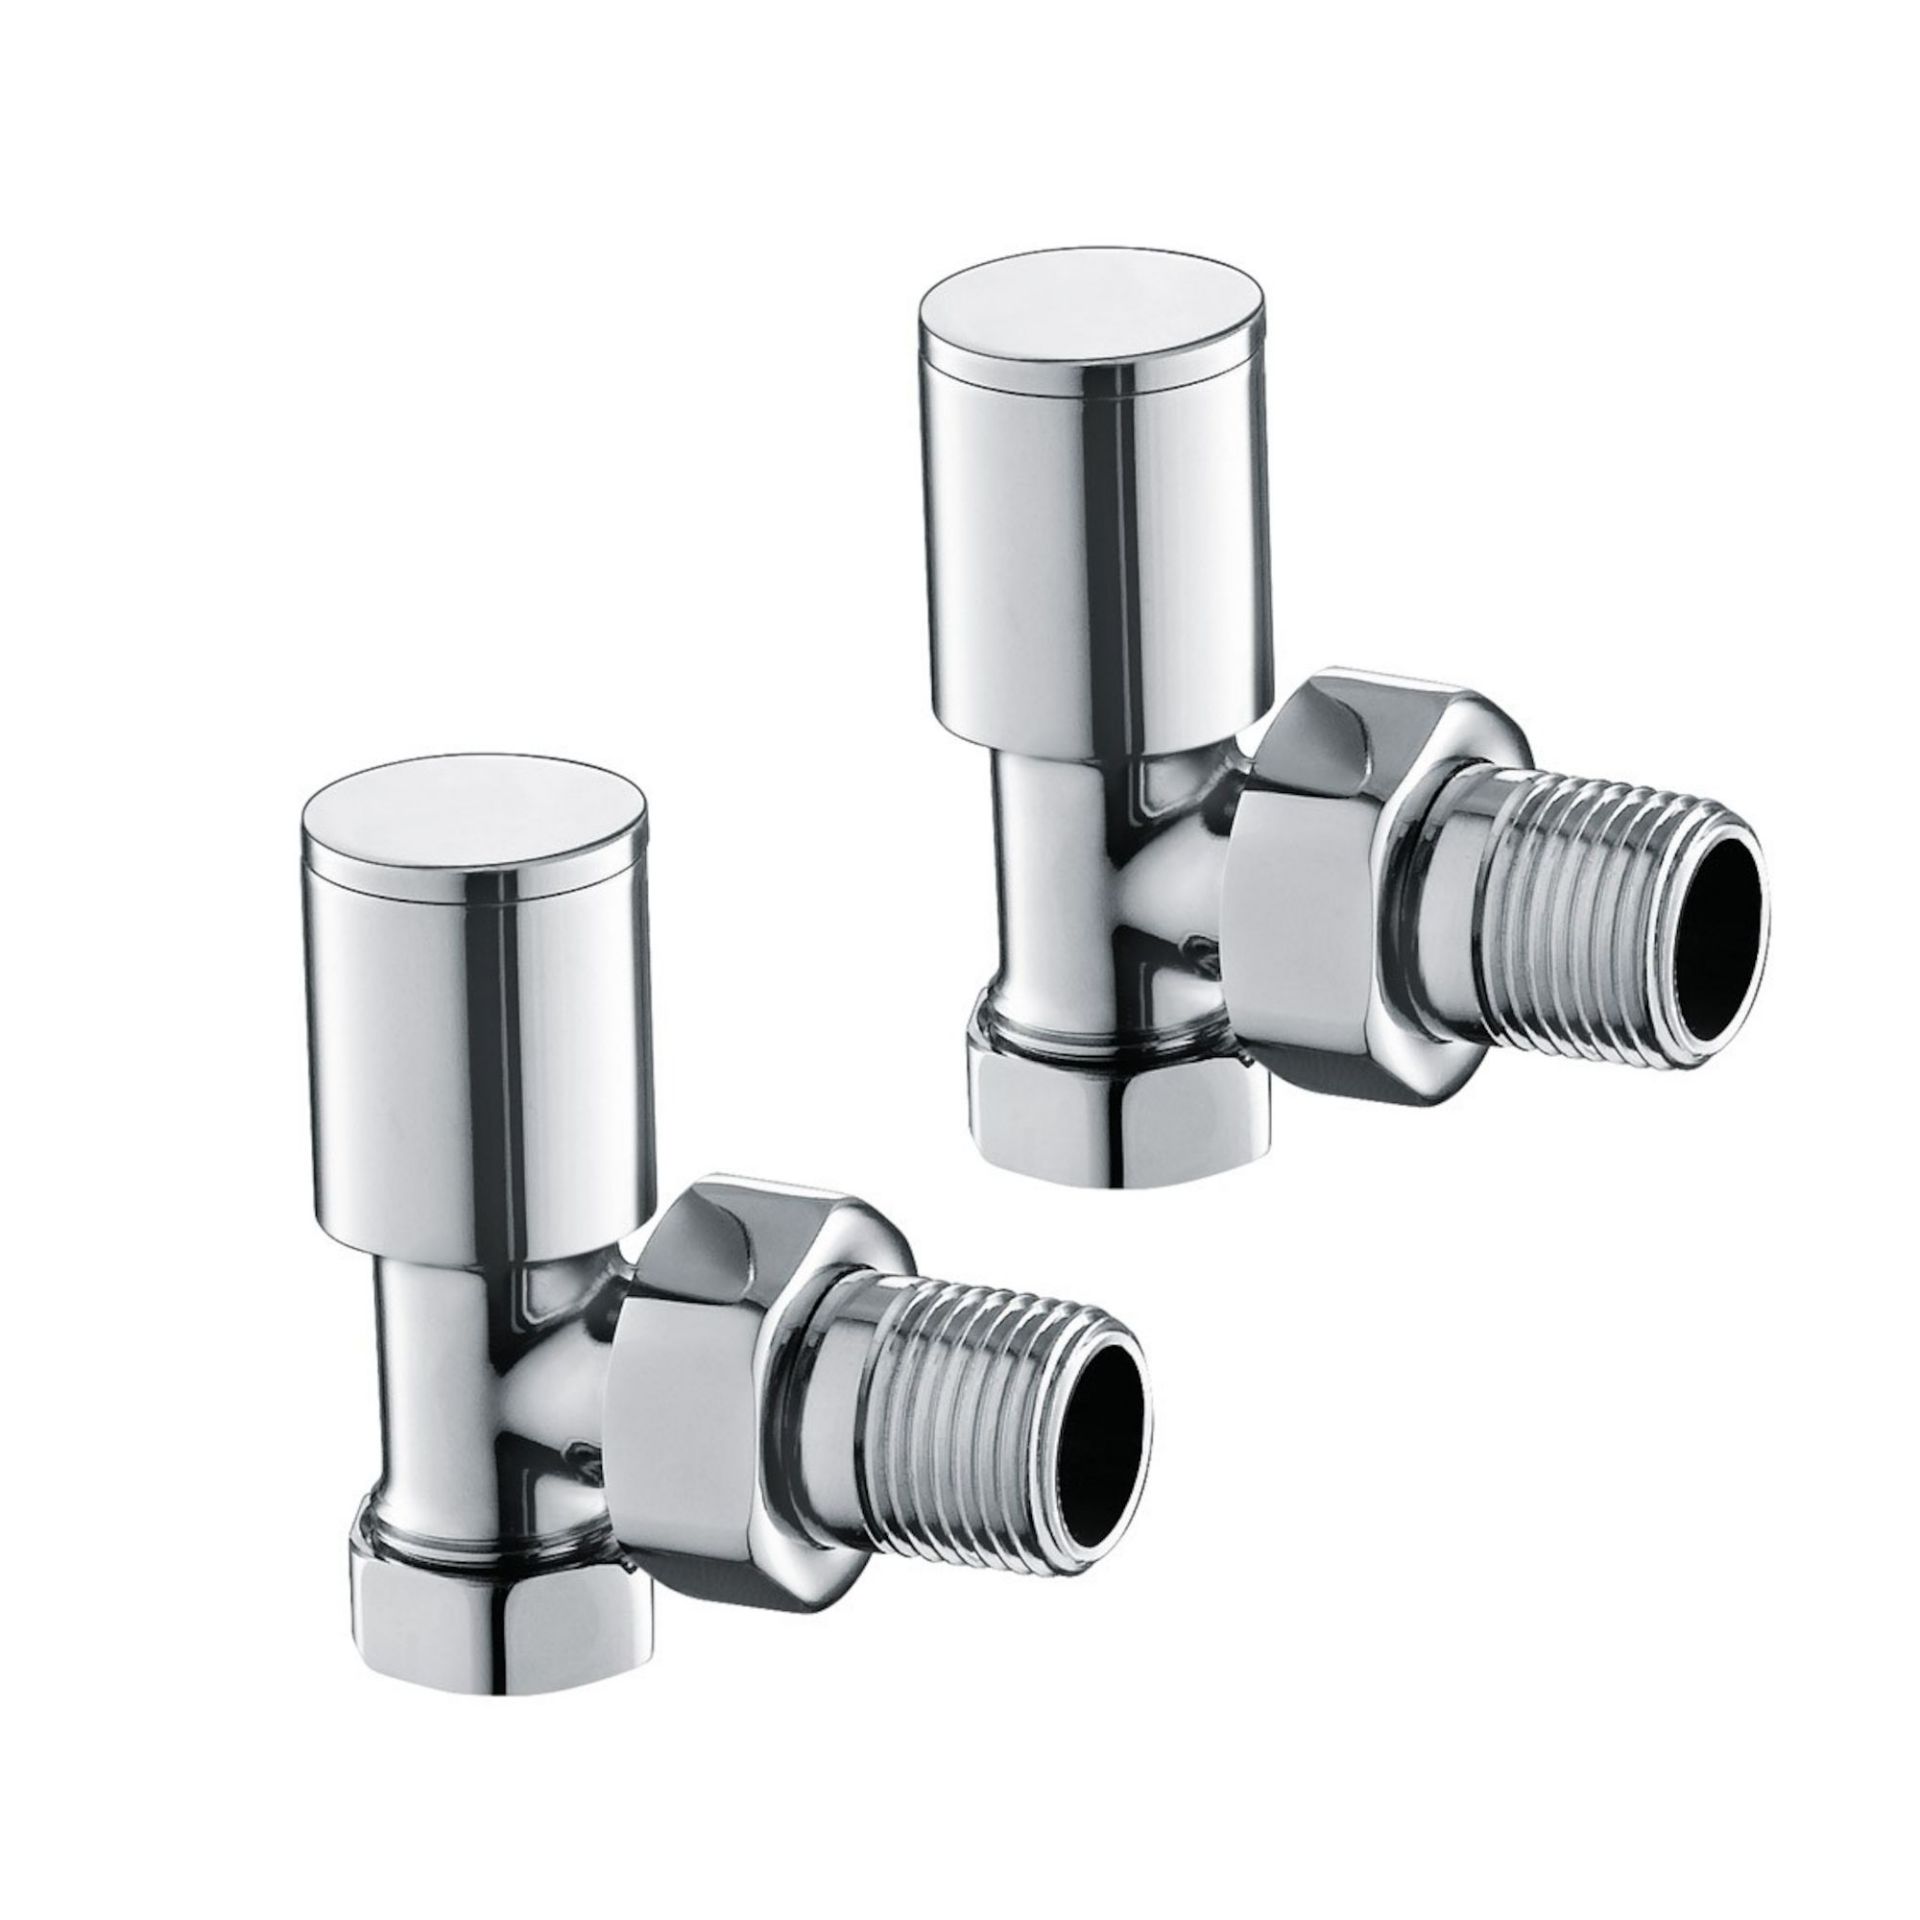 (NK14) 15mm Standard Connection Angled Radiator Valves - Heavy Duty Polished Chrome Plated Brass - Image 2 of 3